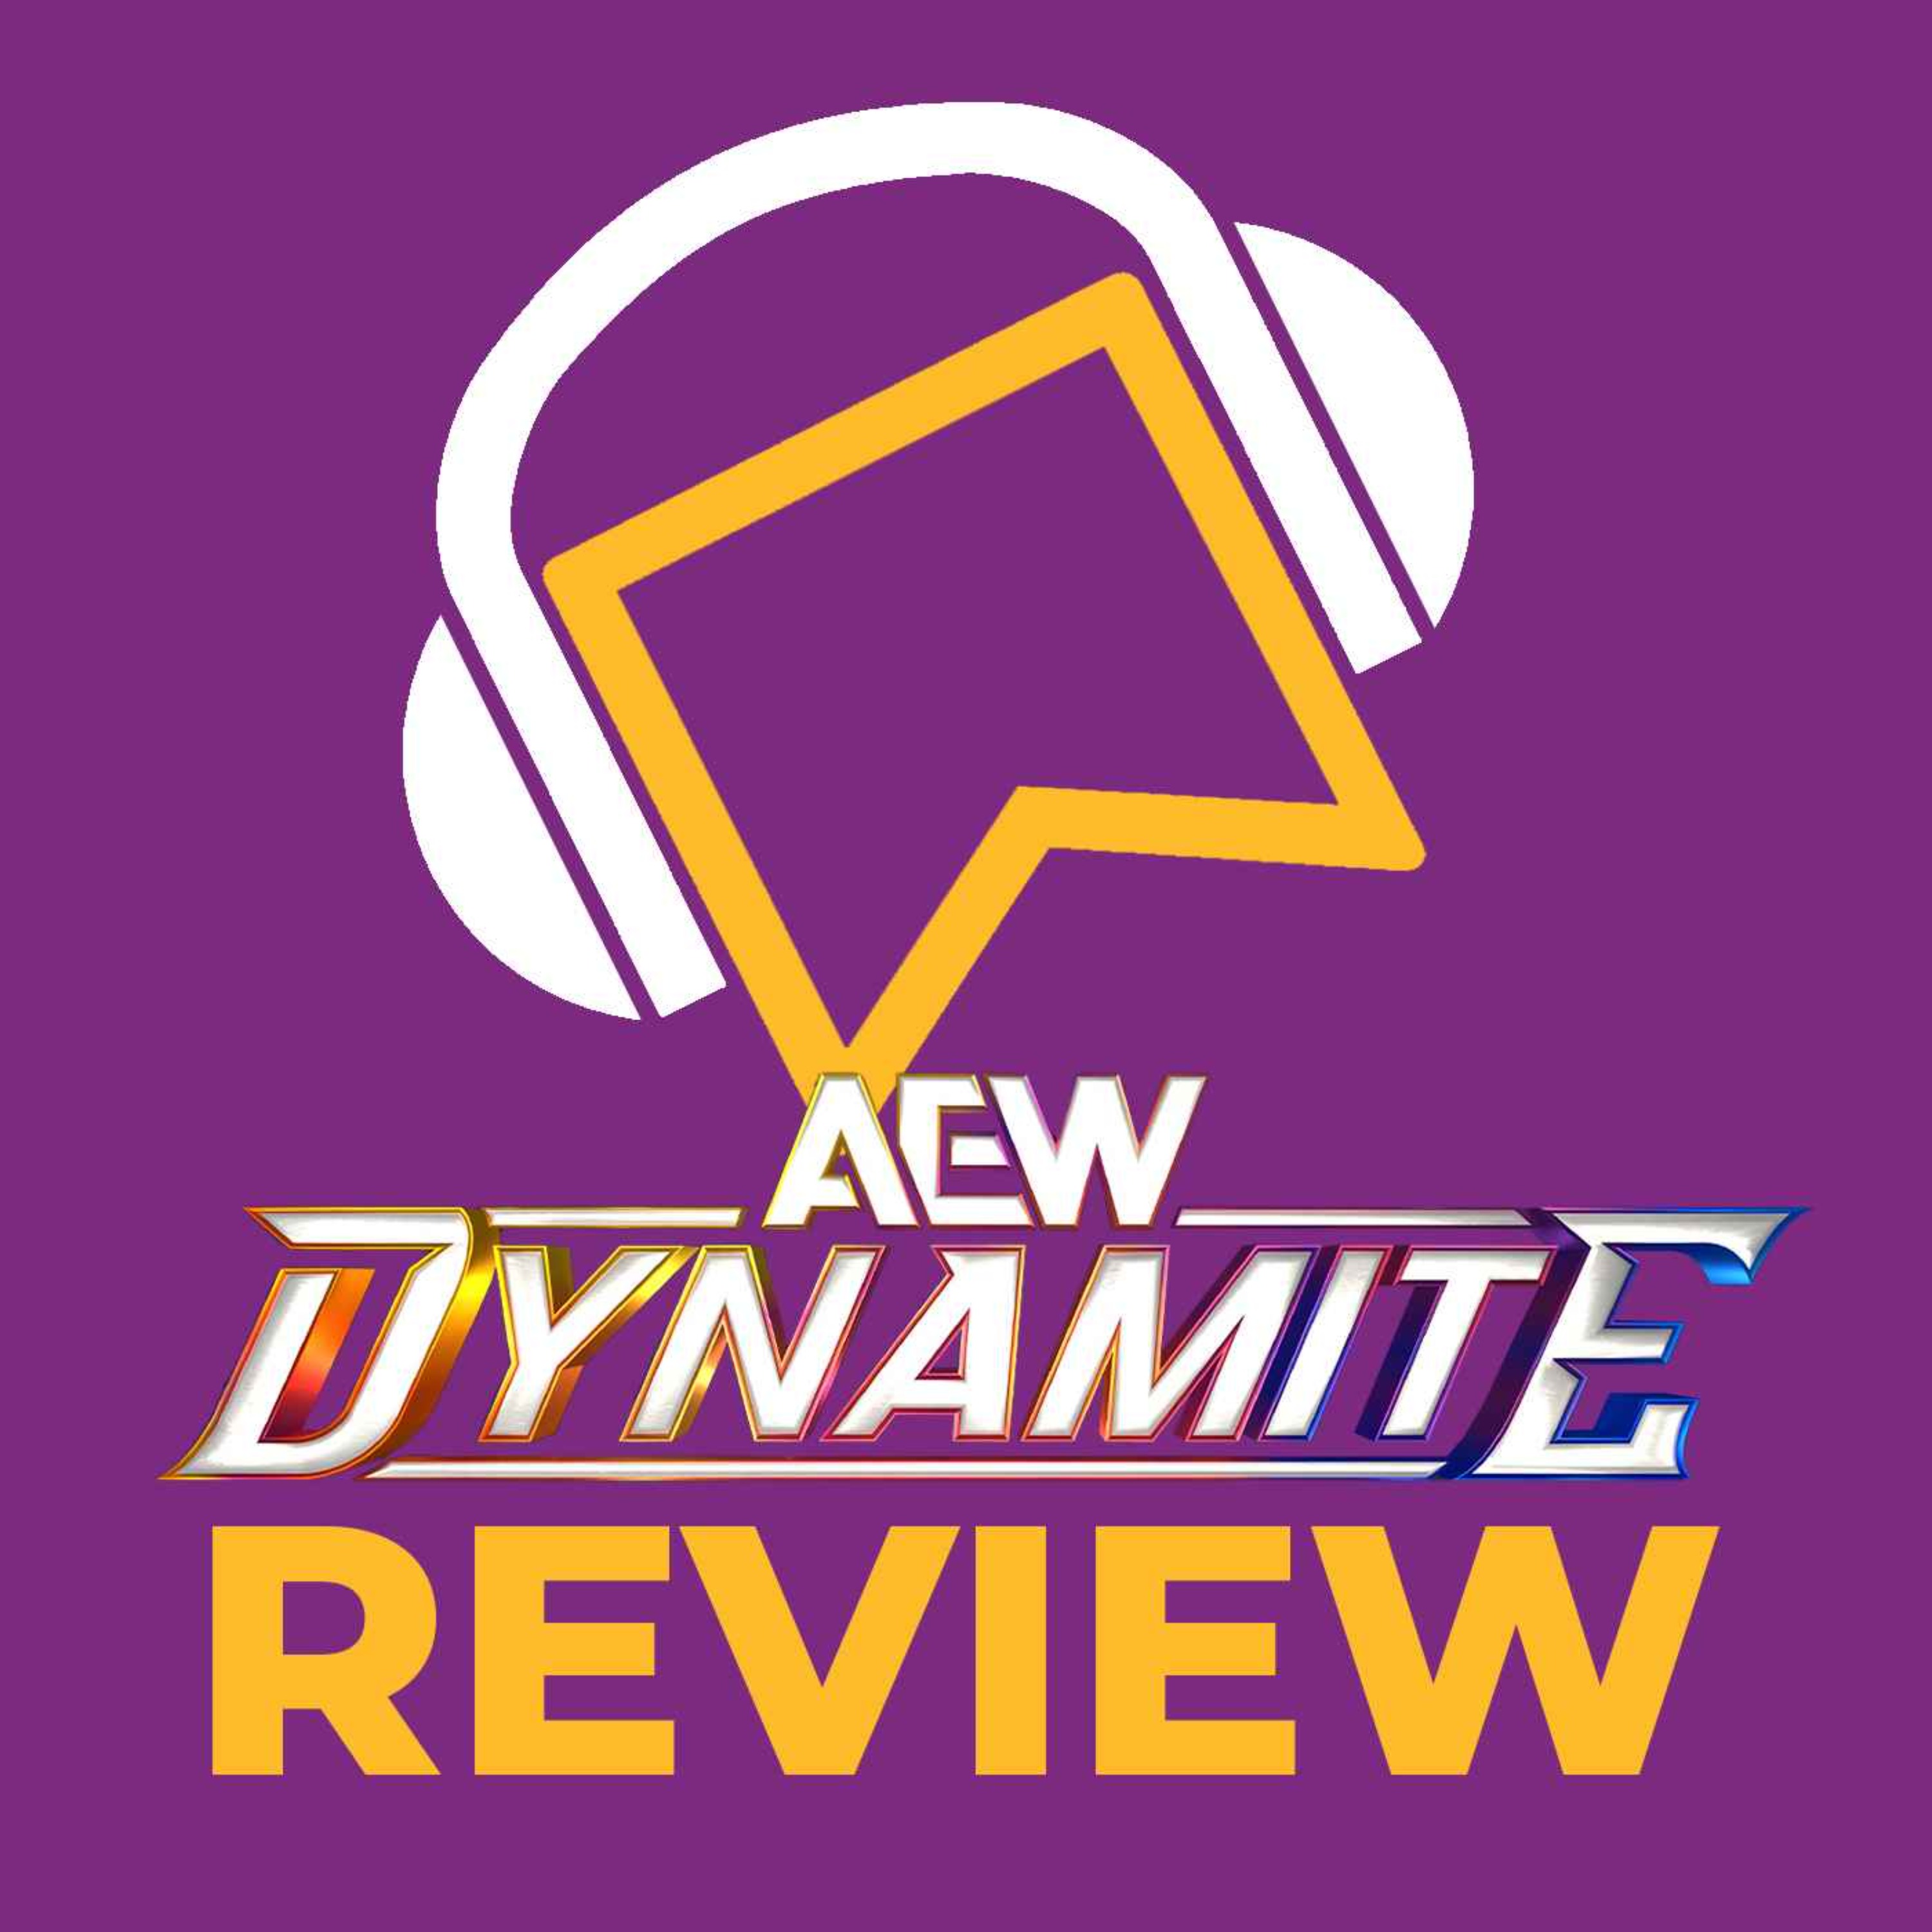 AEW Dynamite Review - Tony Khan RETURNS & Darby Allin Has A FLAMETHROWER?! Double Or Nothing Gets Even Bigger! Adam Copeland Covers Malakai Black In Blood?!